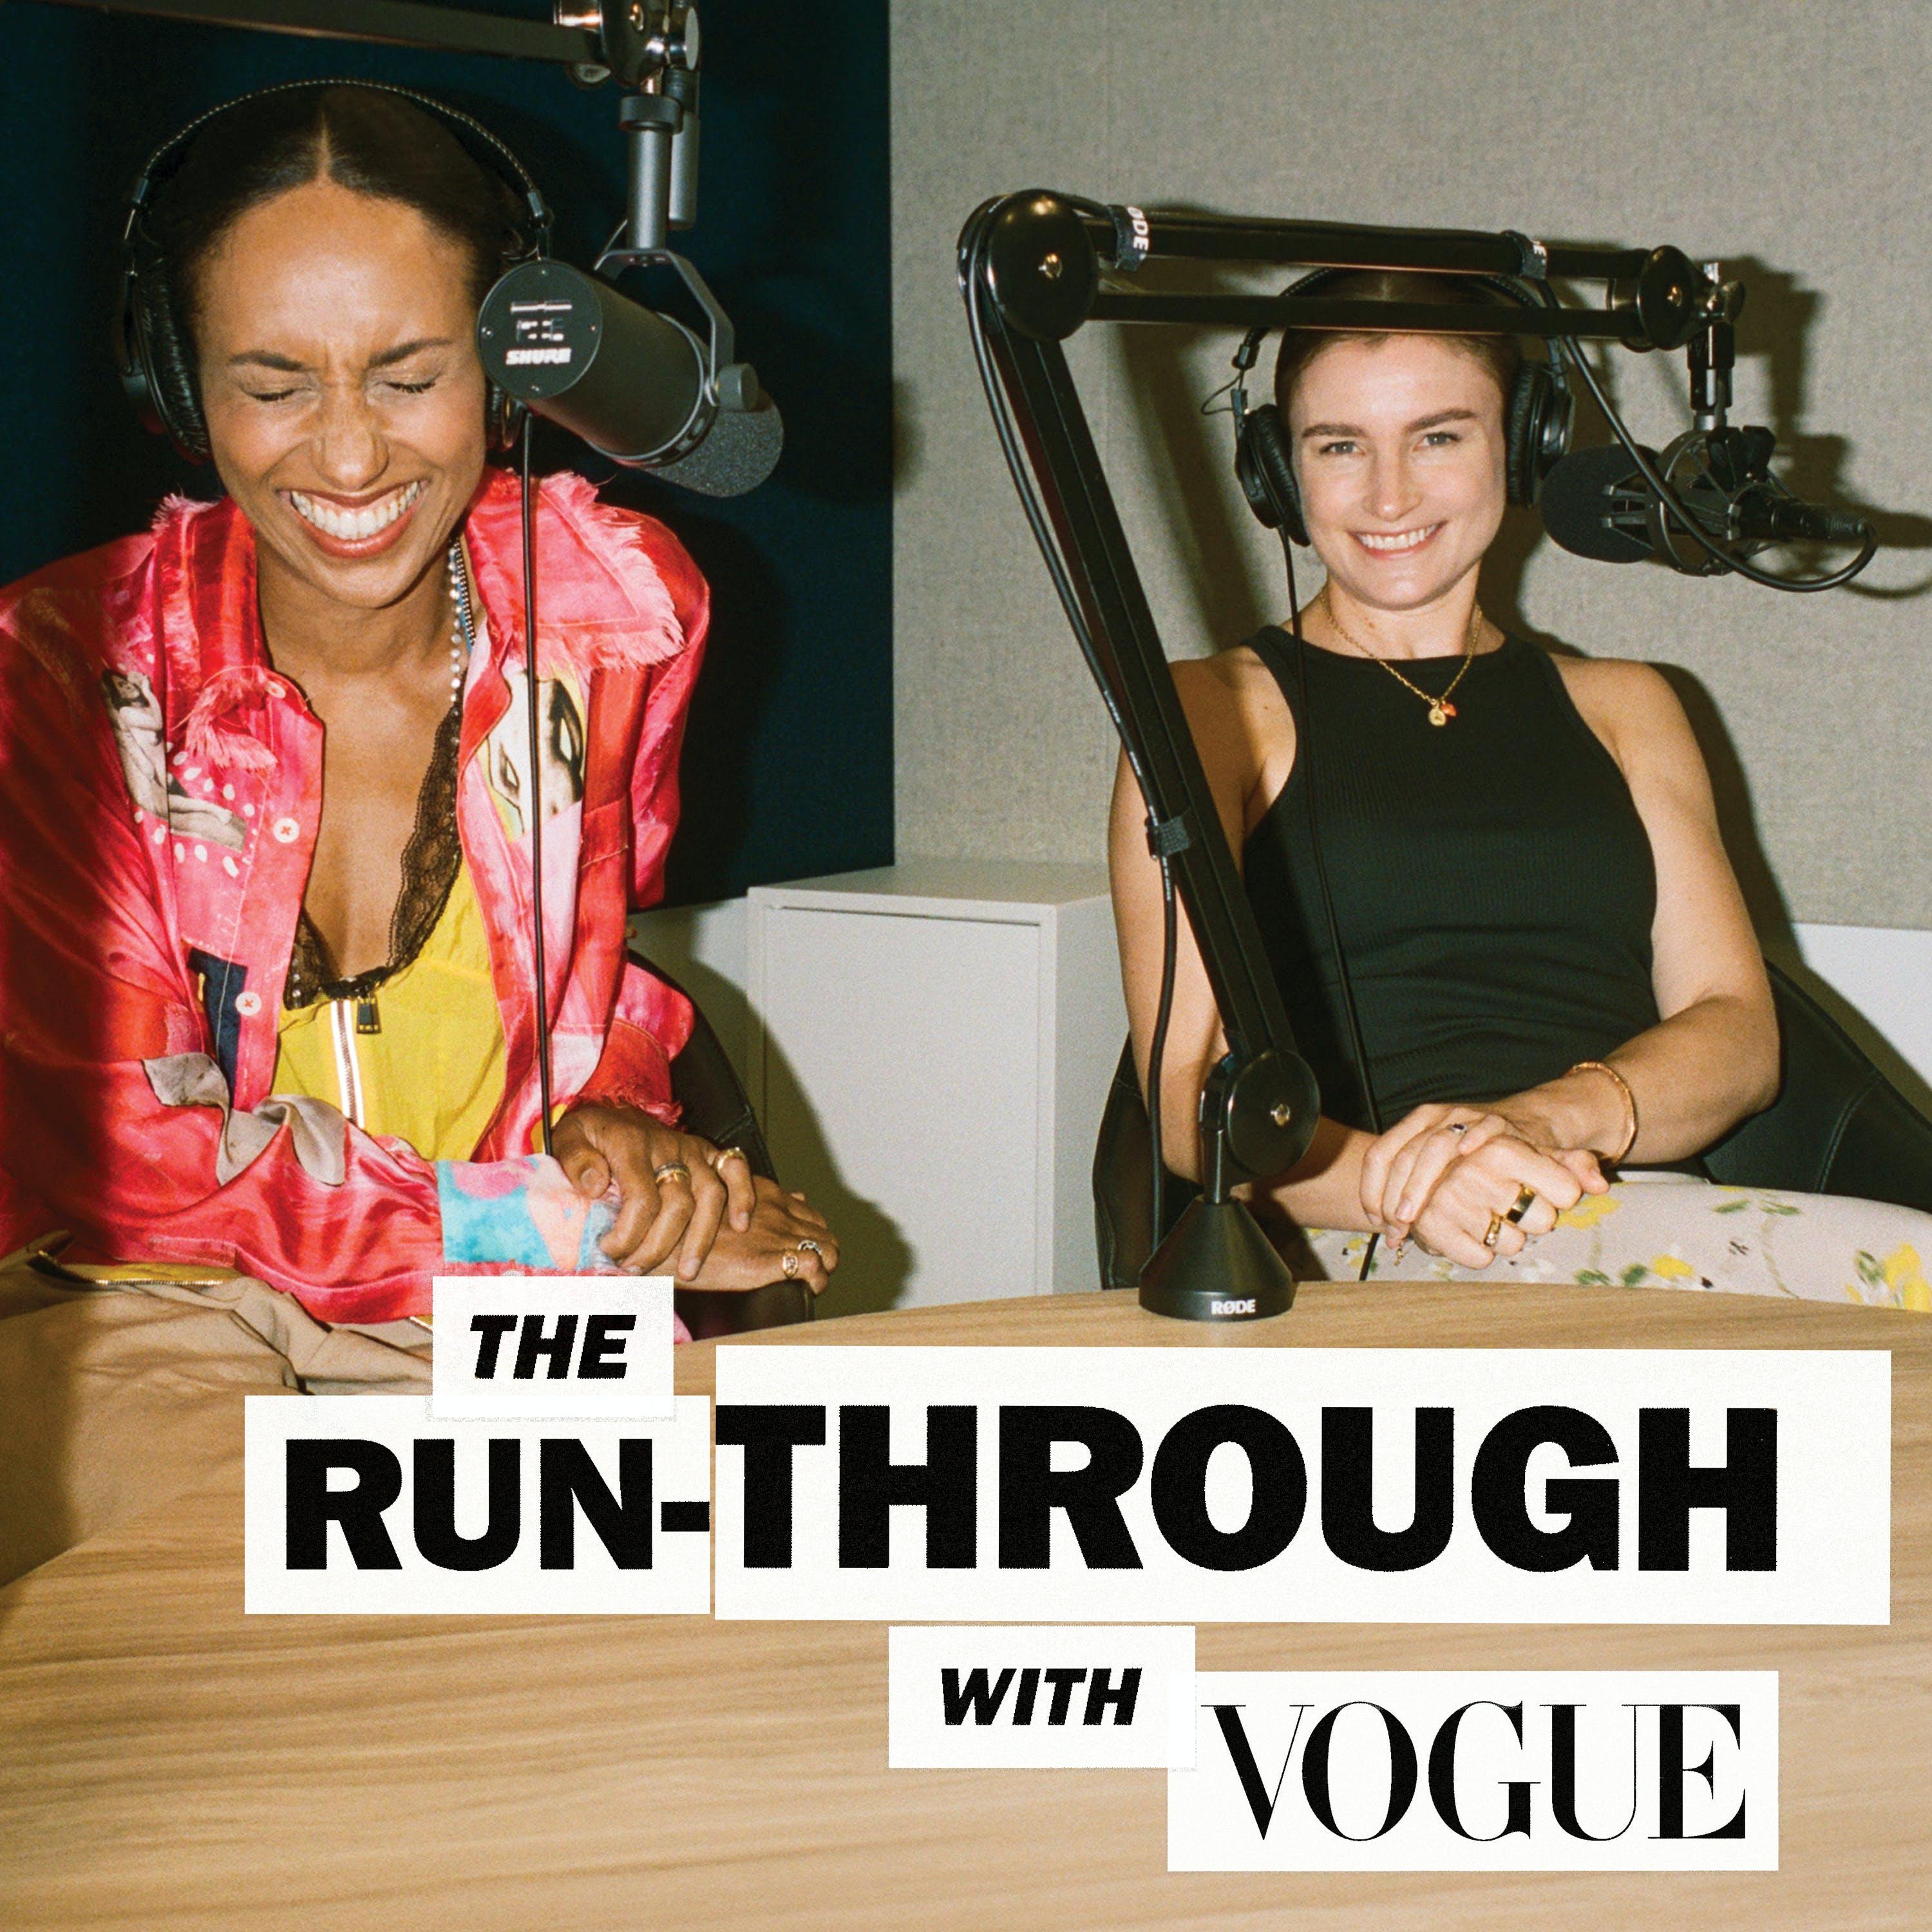 Thumbnail for "Inside NYFW: Vogue’s Virginia Smith Recaps The Runway | PLUS Model and Activist Bethann Hardison".